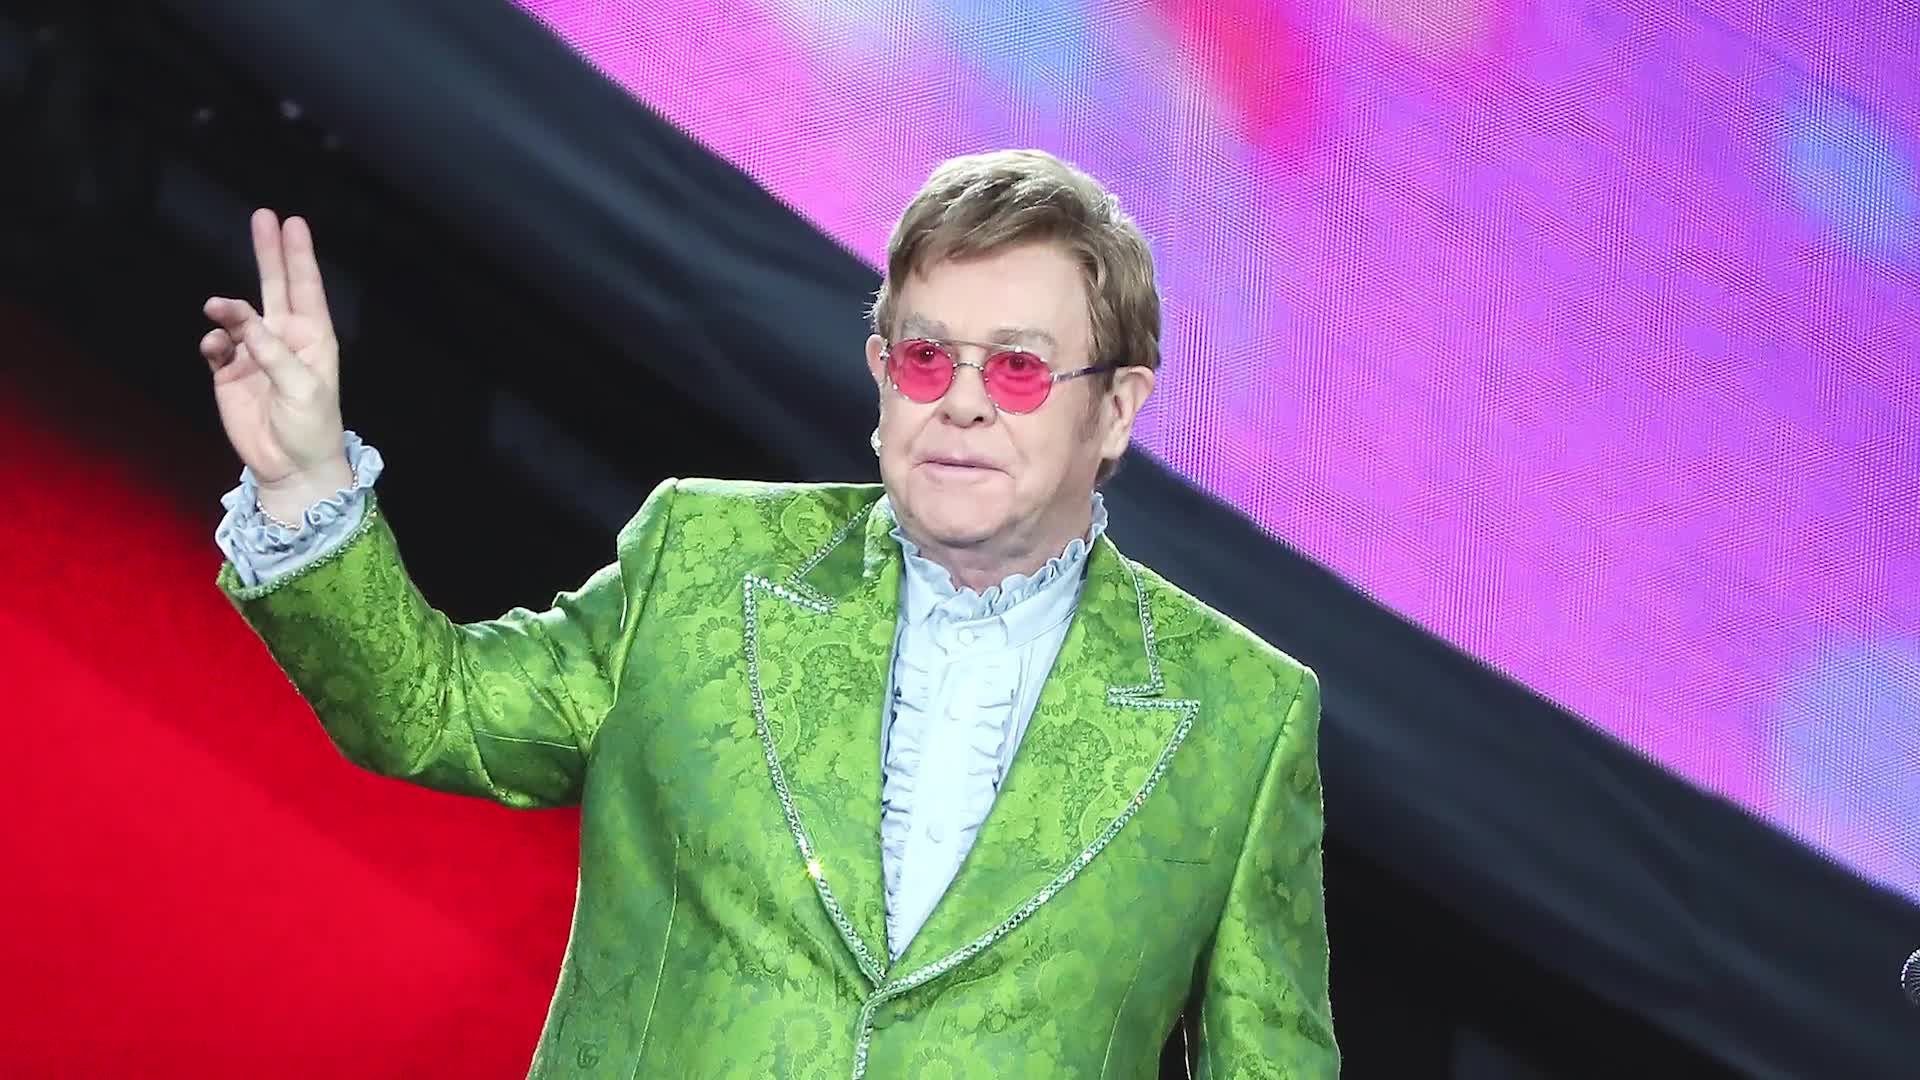 Watch Elton John's Life in Looks Proves He's Always Had a Flair